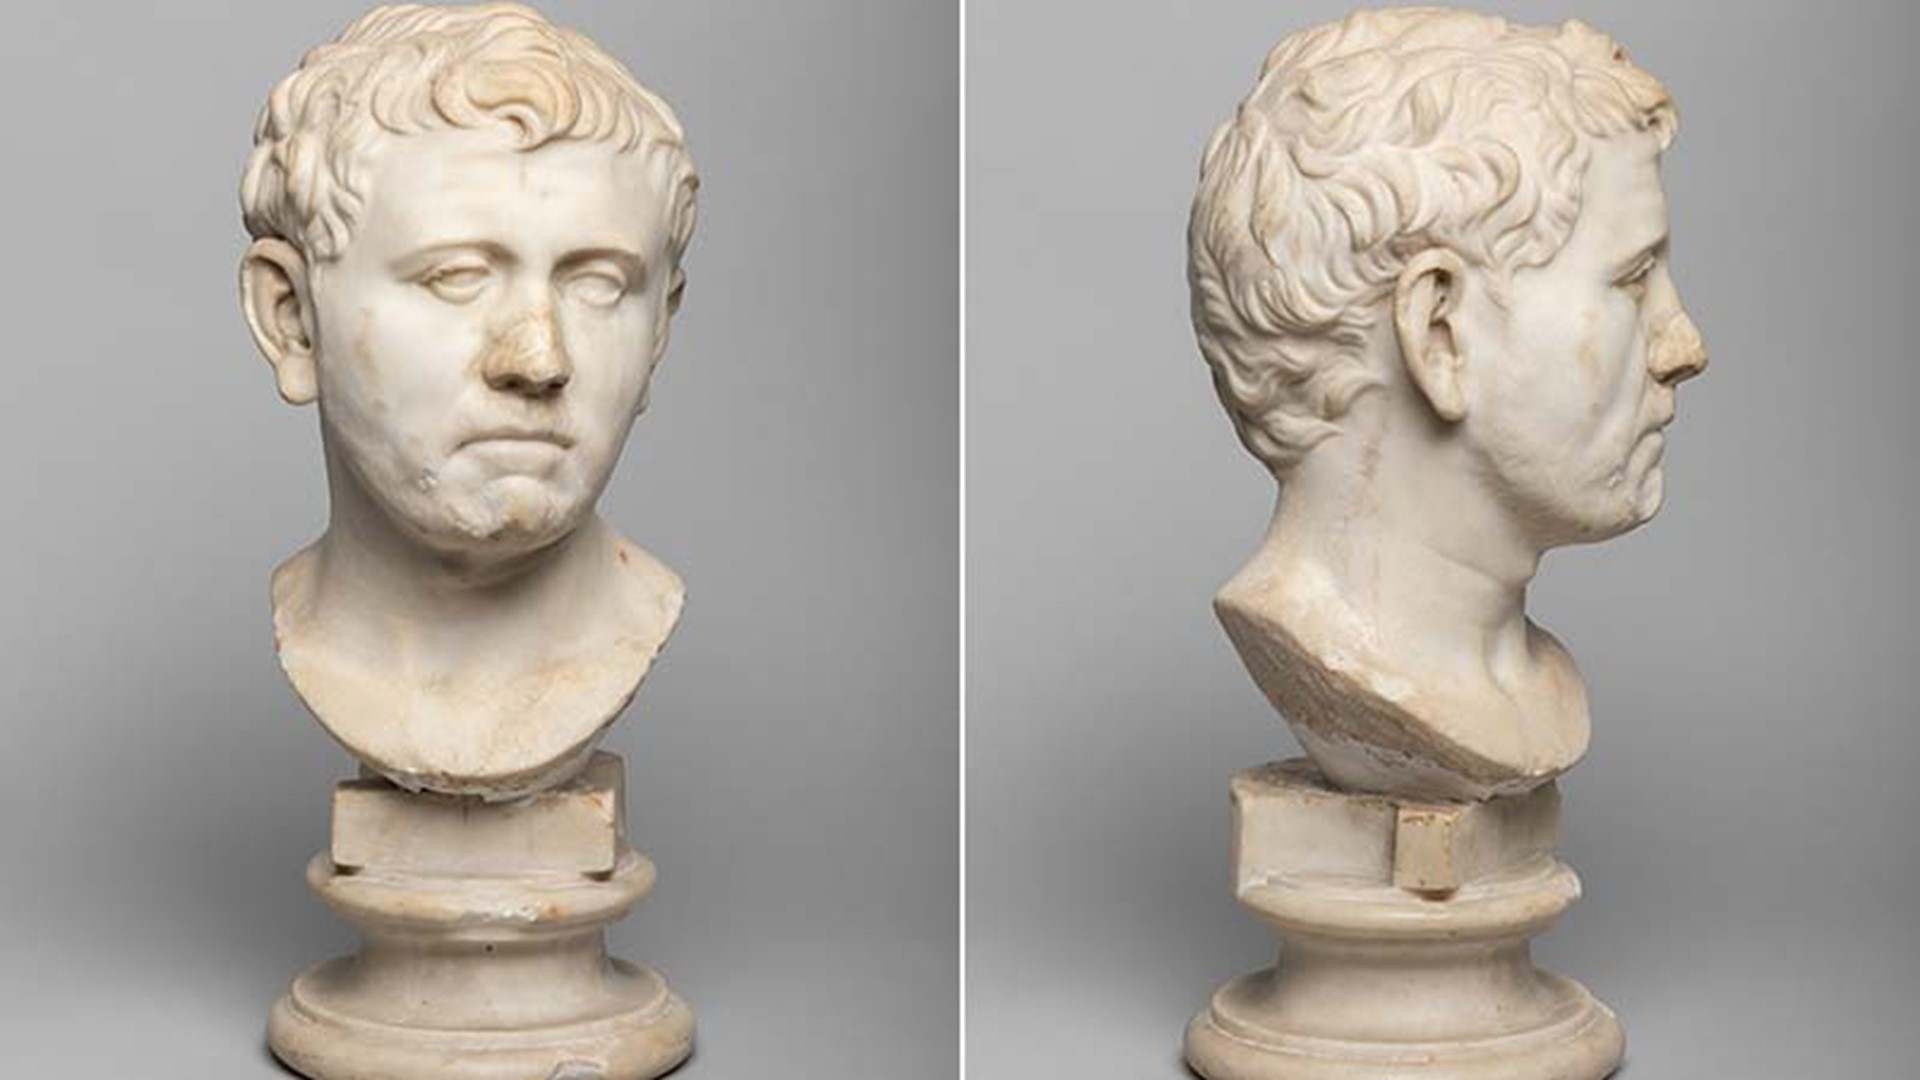 The marble sculpture, which dates from the late 1st century BC to the early 1st century AD, disappeared from Germany after World War II and once belonged to a king.